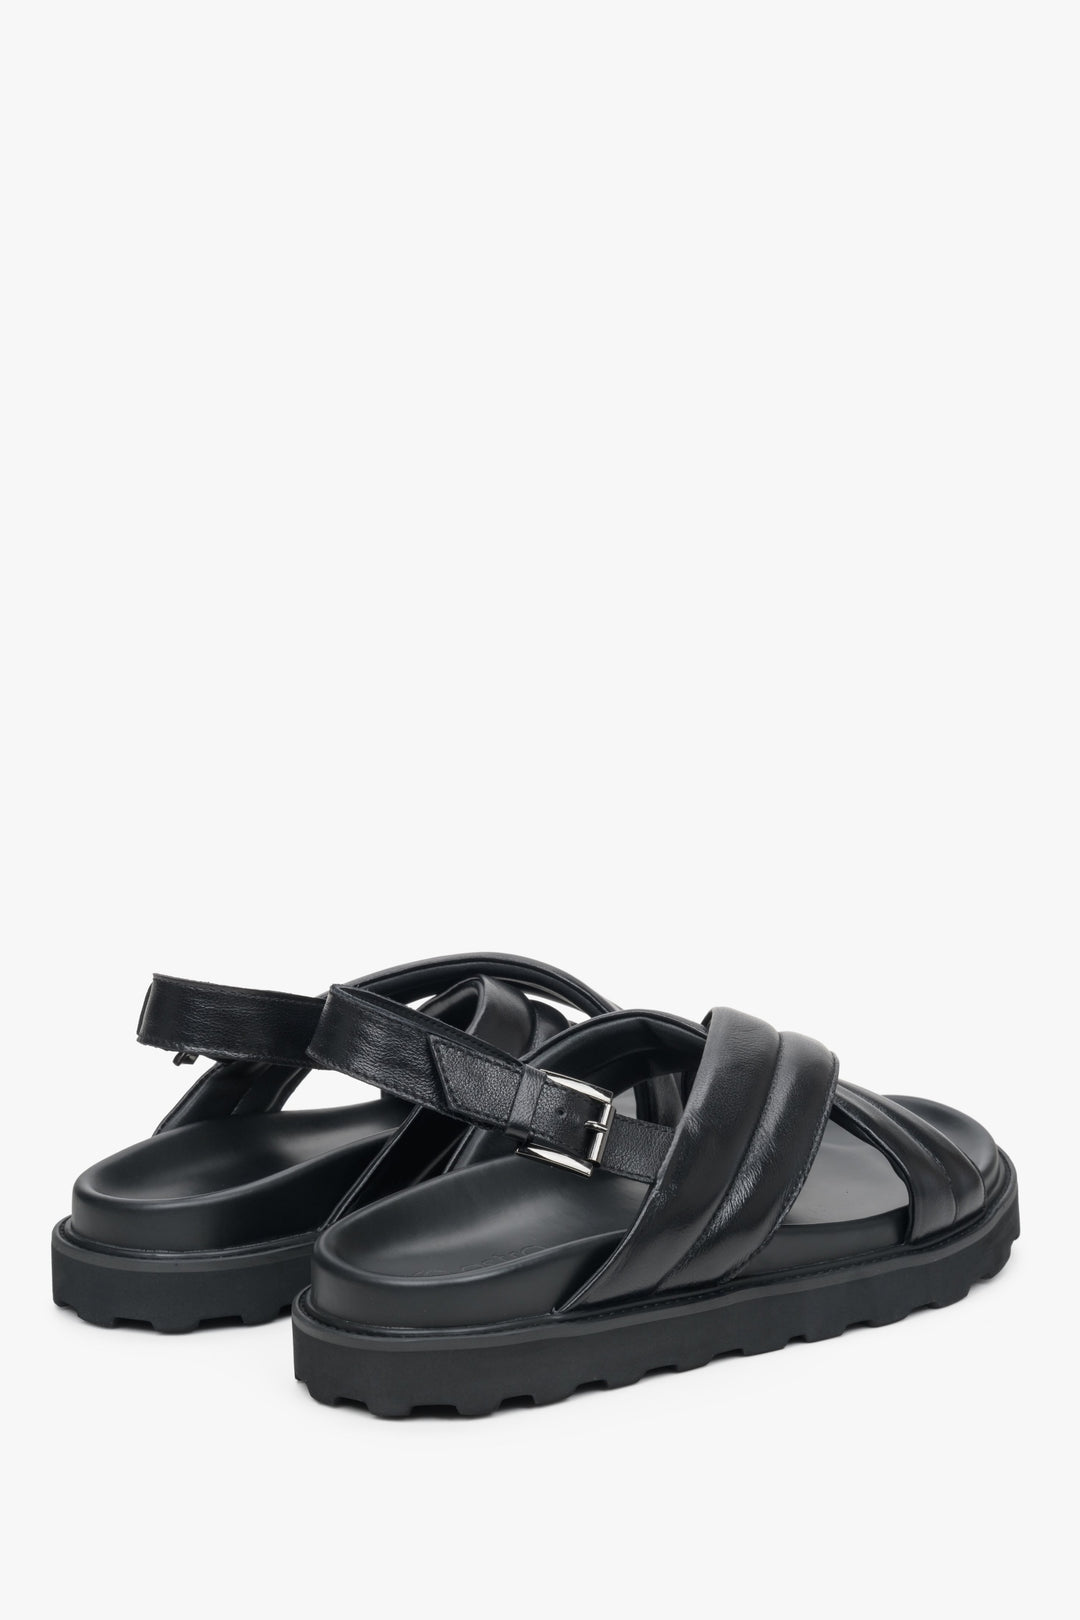 Men's black  cross-strap sandals by Estro - close-up of the back of the shoes and the side line.